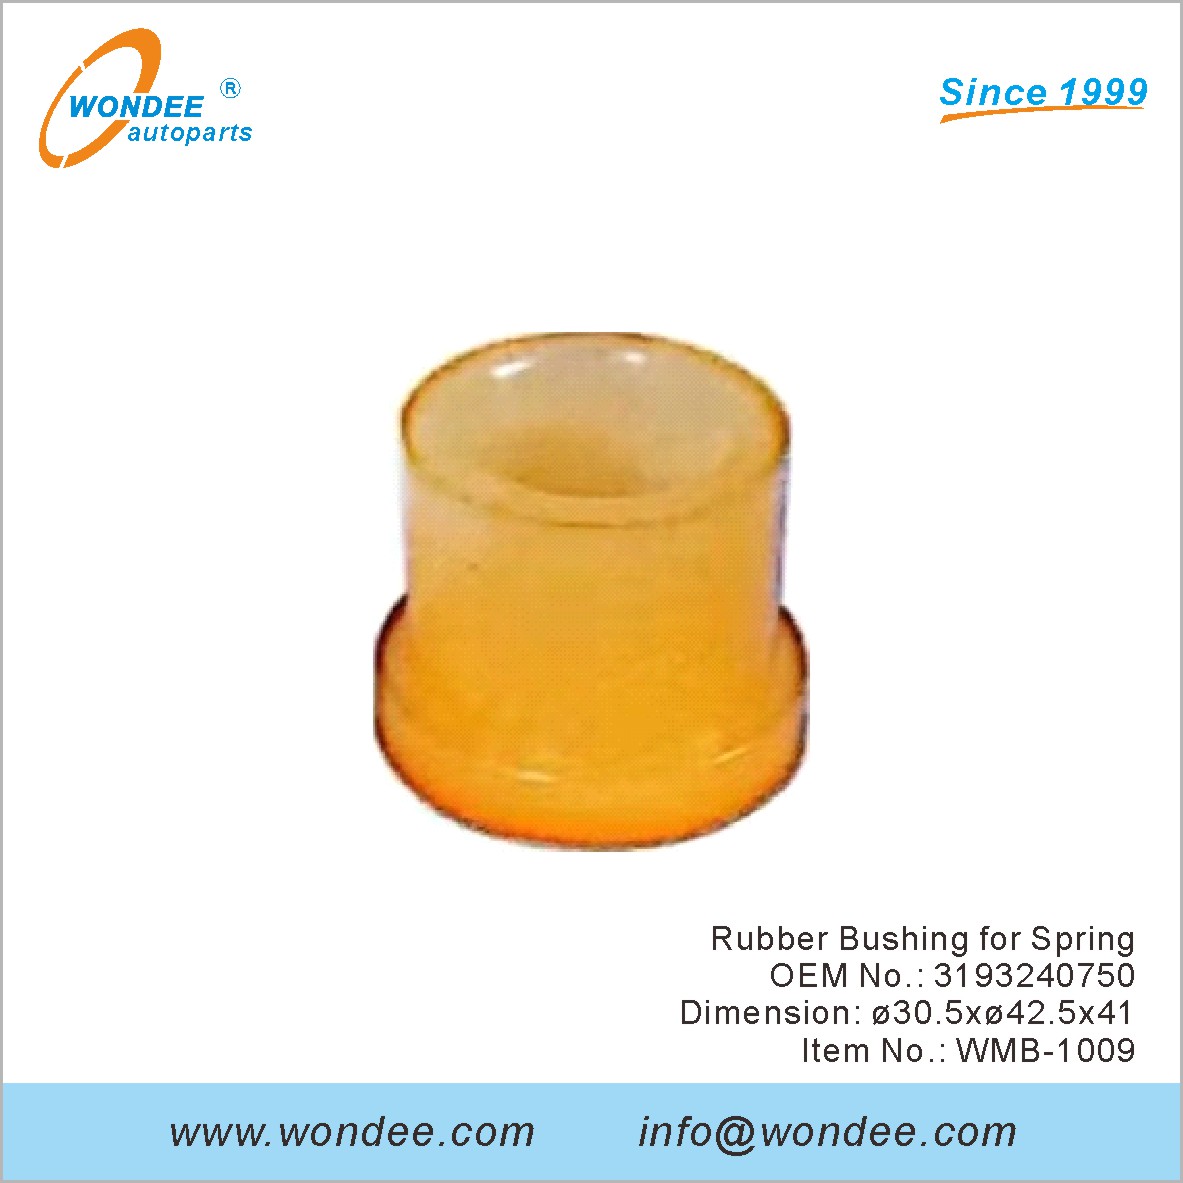 Rubber Bushing for Spring OEM 3193240750 for Benz from WONDEE